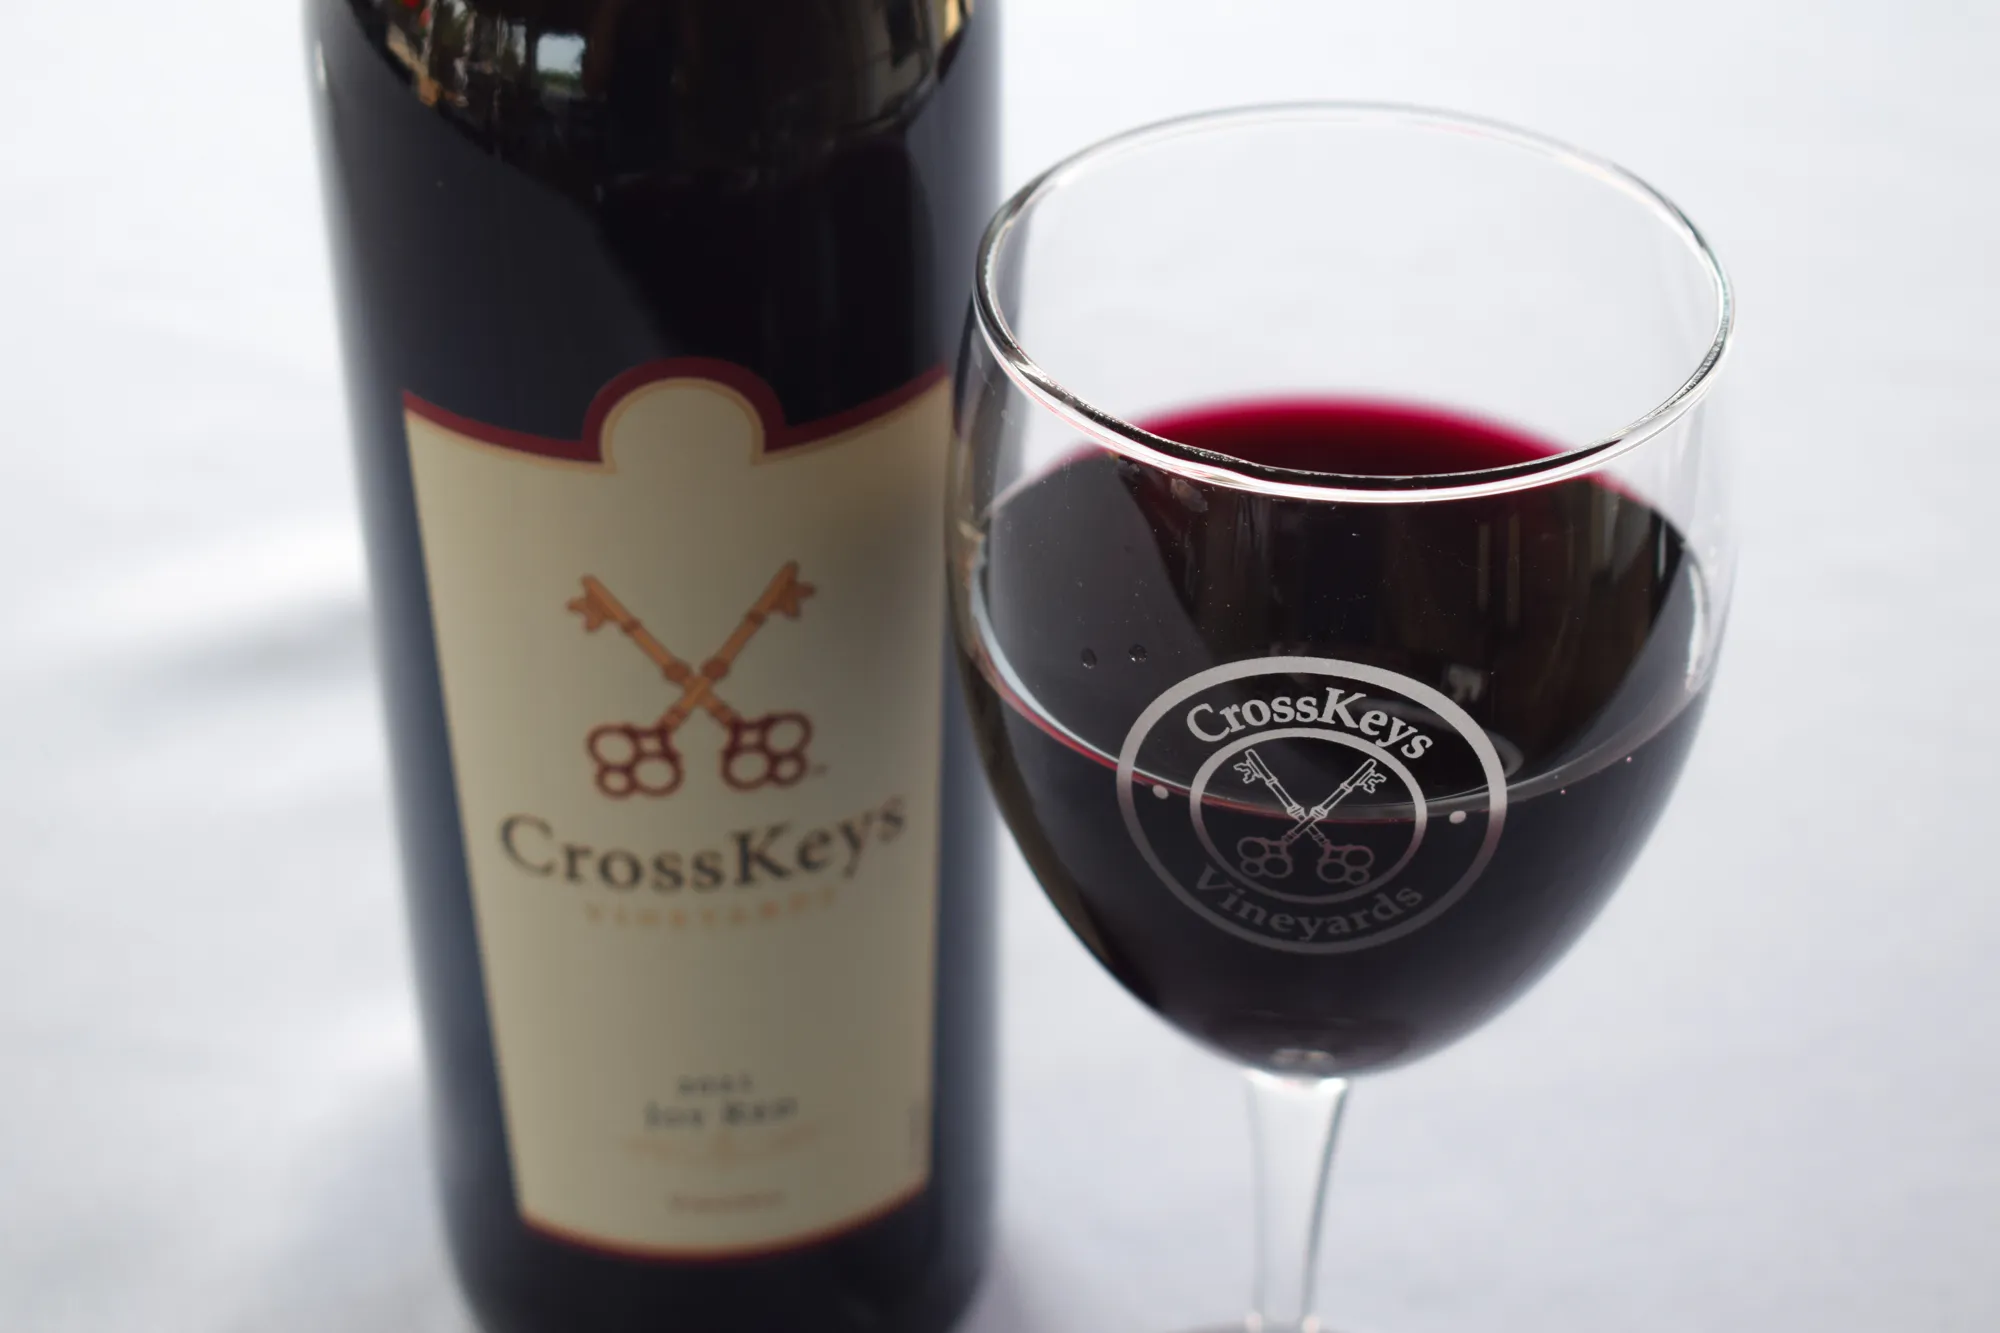 Bottle and glass of CrossKeys red wine